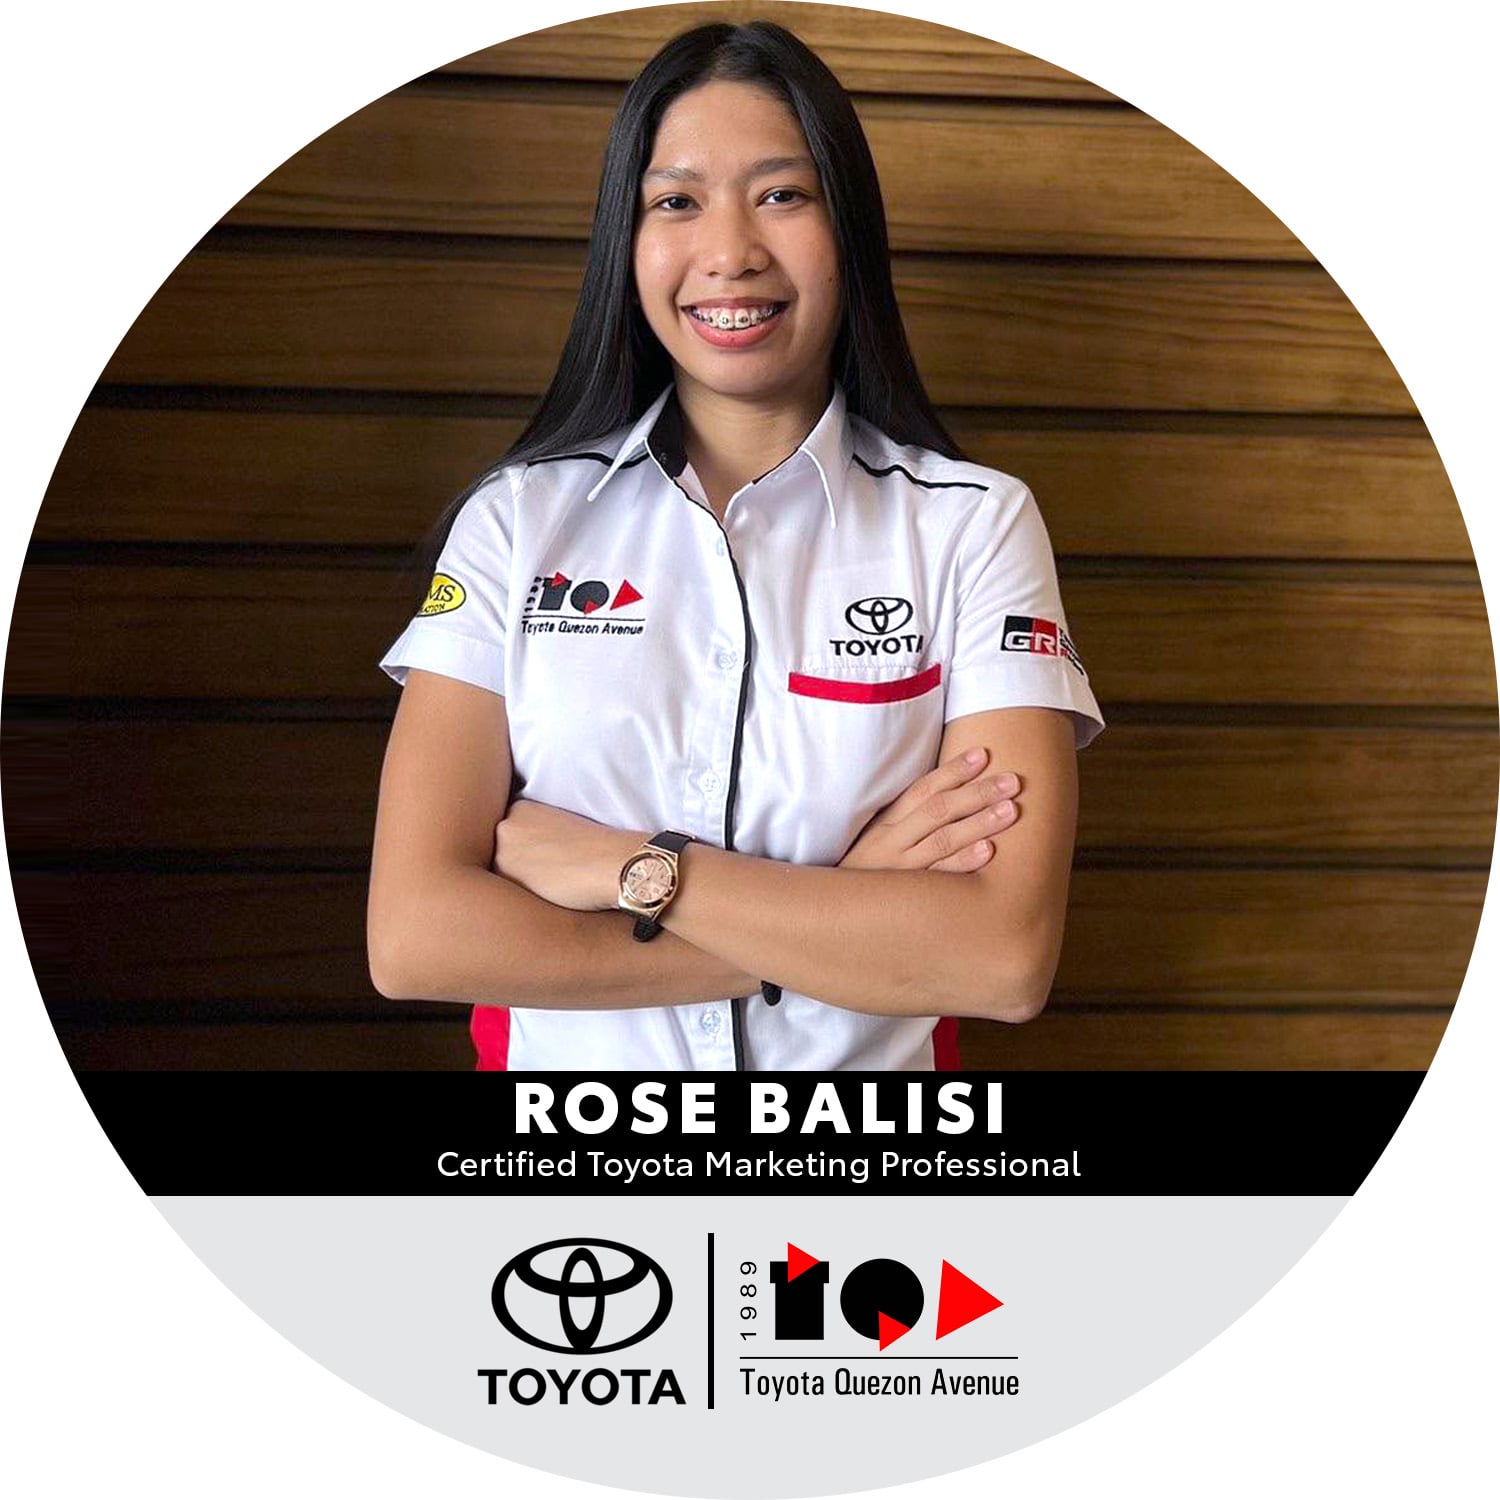 Certified Toyota Marketing Professionals - Rose Balisi